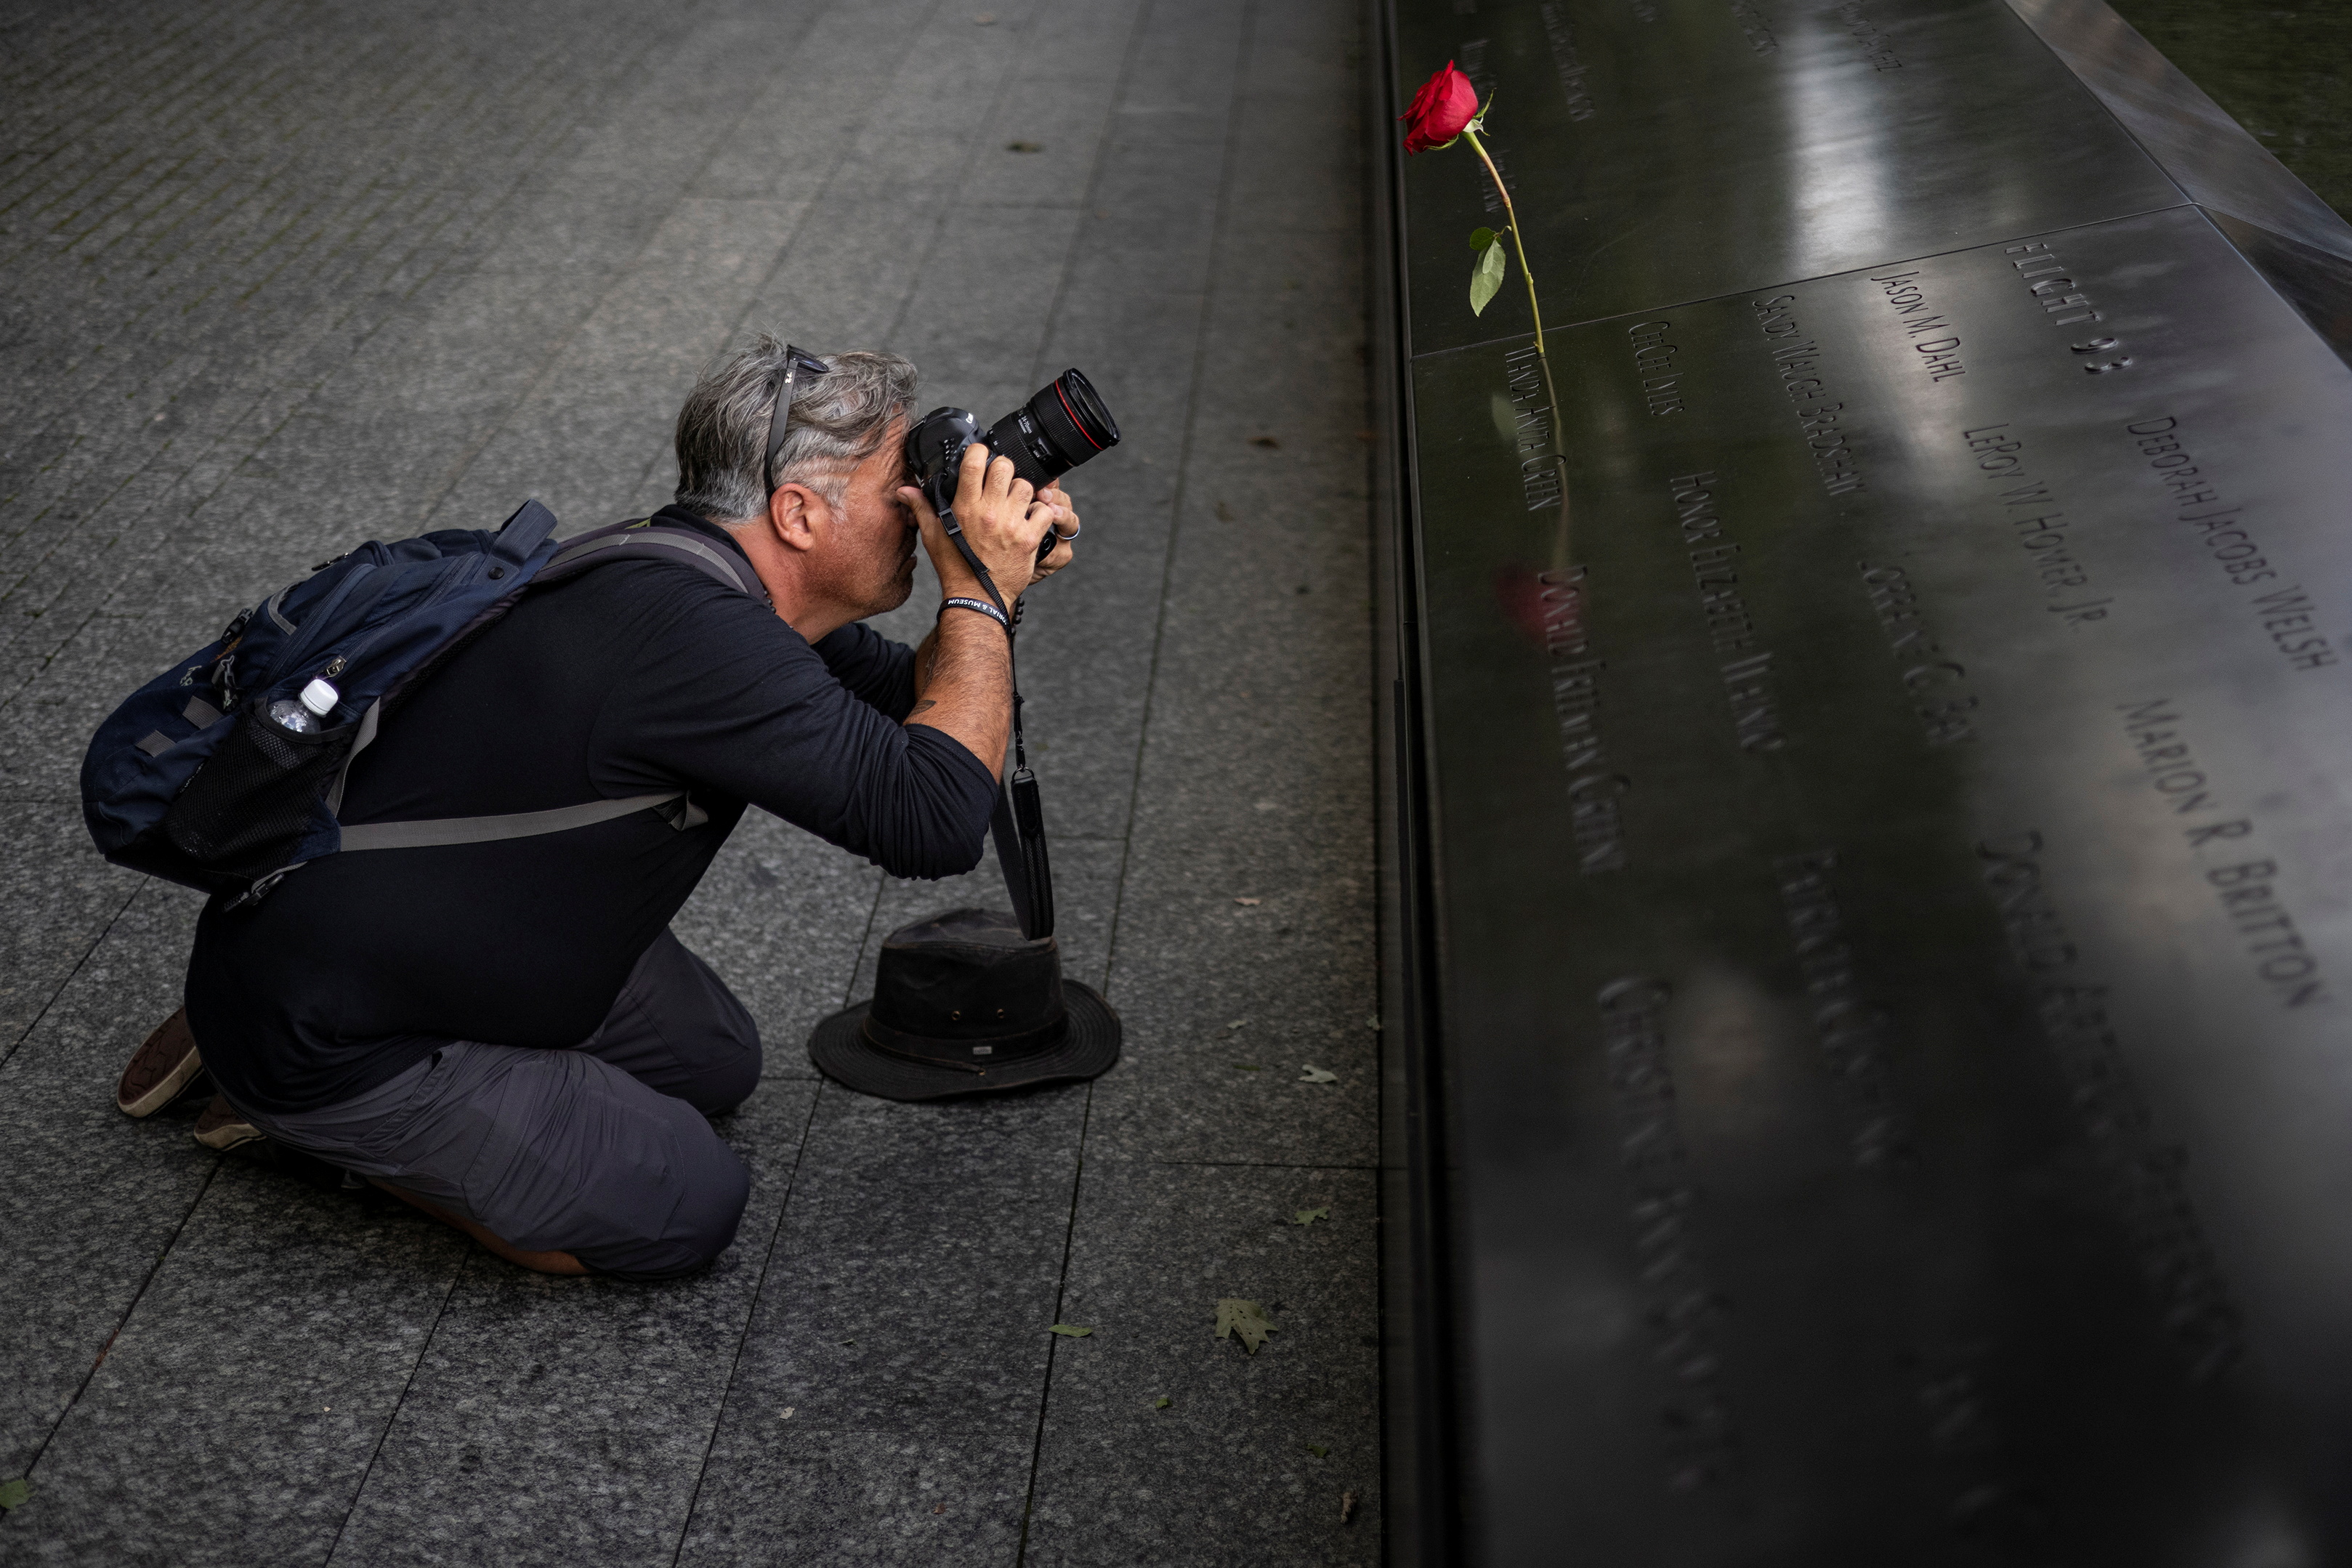 The Wider Image: September 11 attacks fuse photographer and survivor in trauma